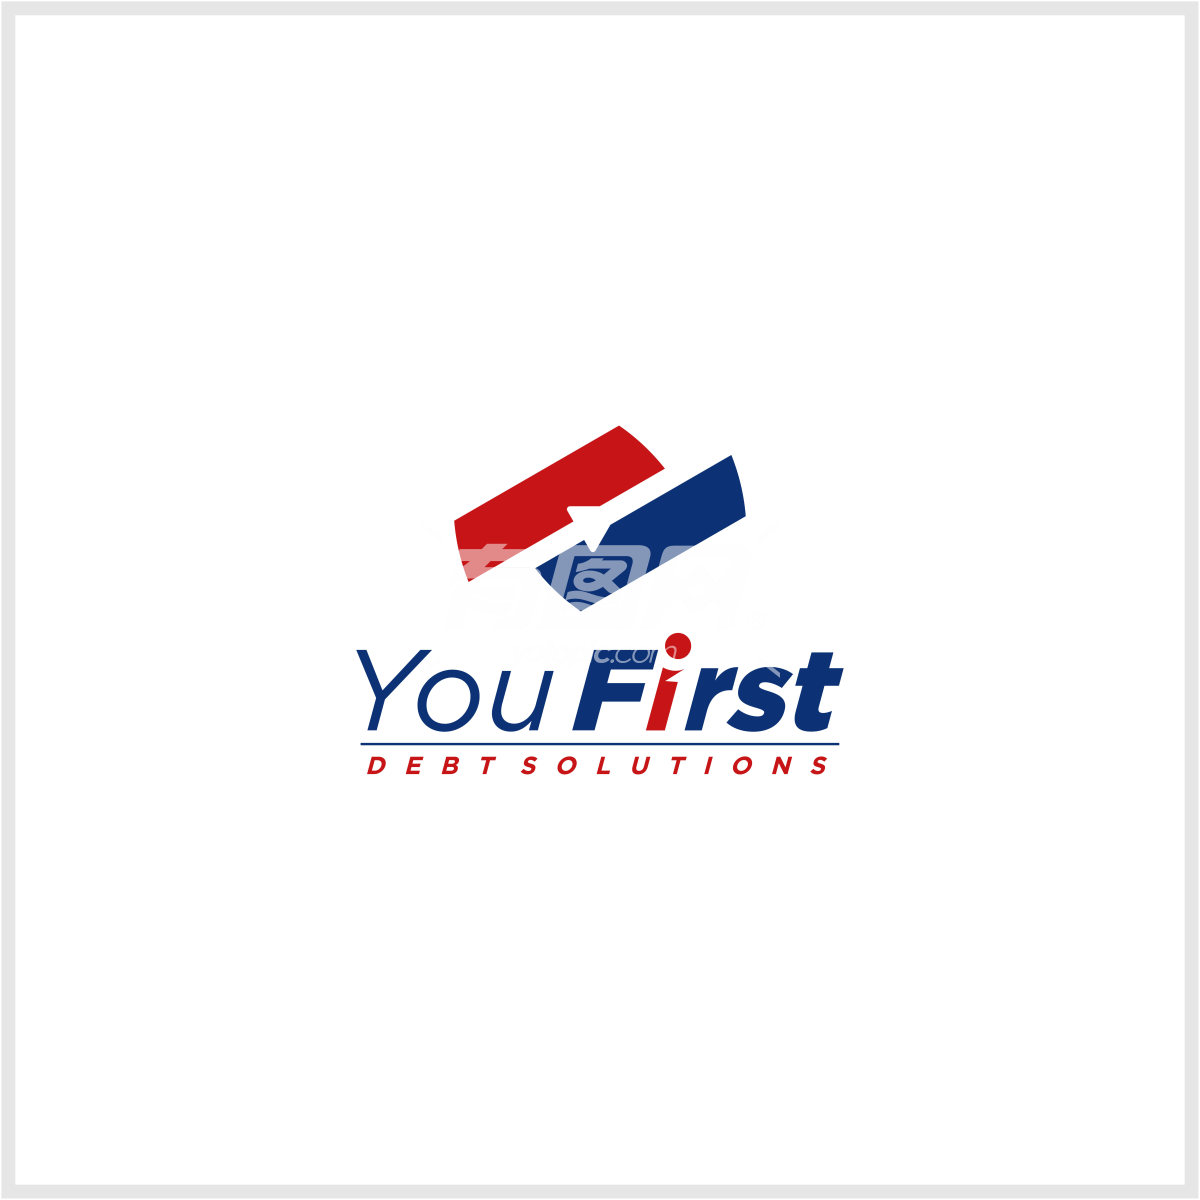 YouFirst Debt Solutions的标志设计